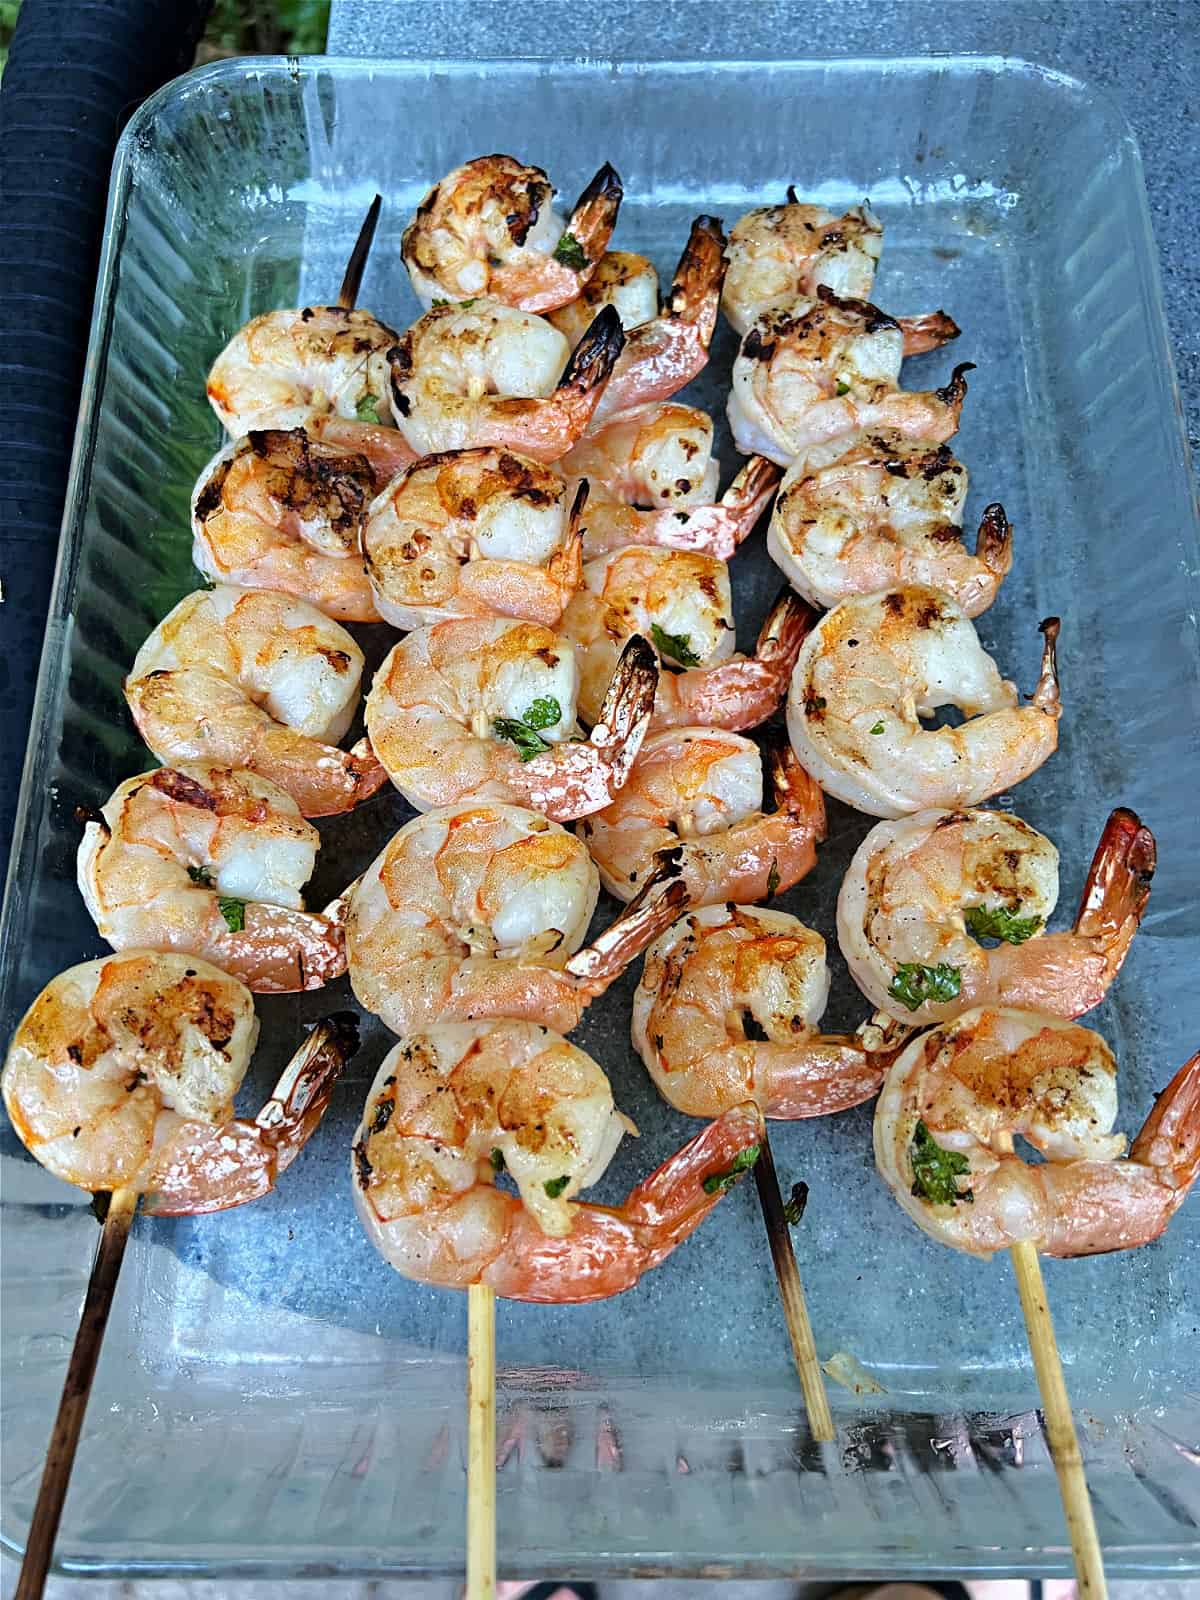 Cooked shrimp skewers removed from the grill.